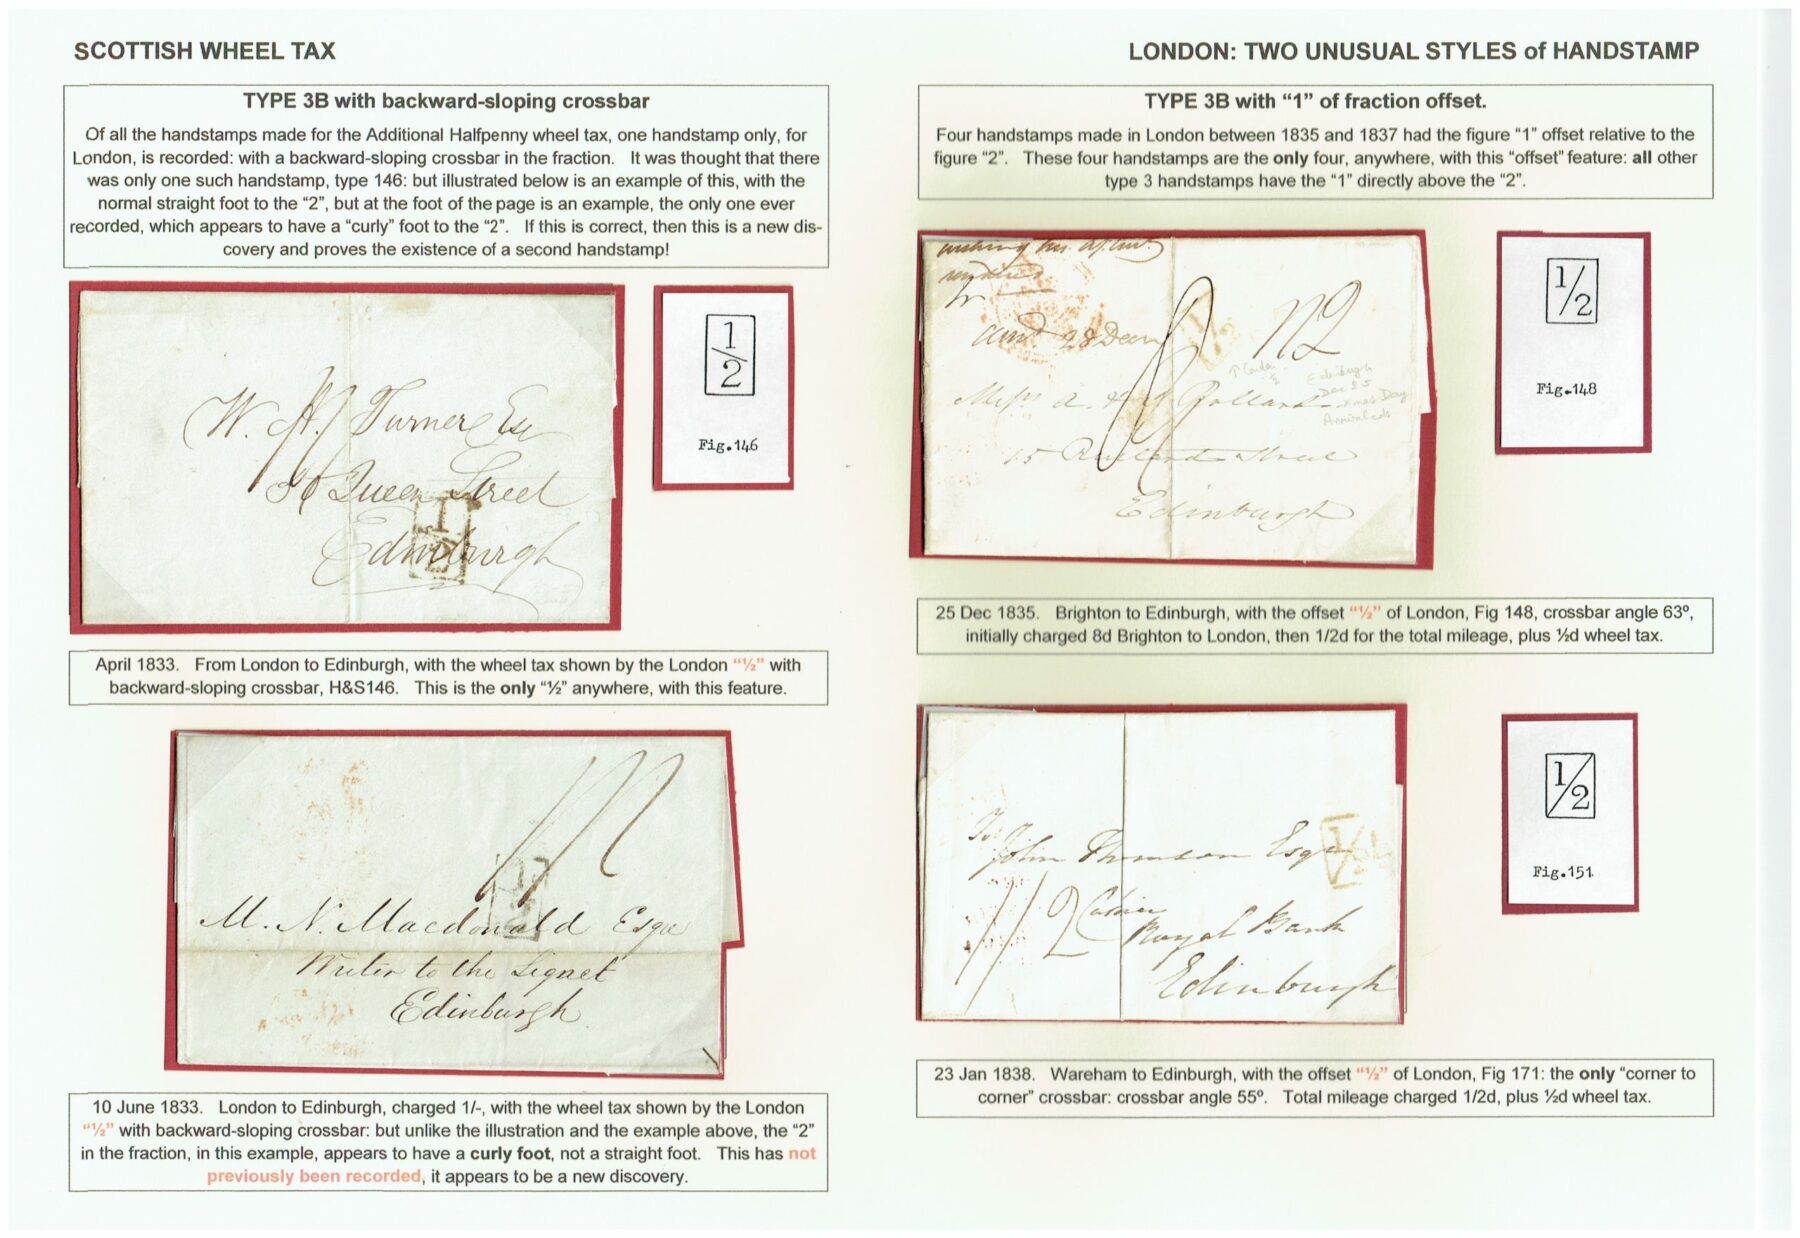 Evolution of the Scottish Wheel Tax Handstamps - ABPS